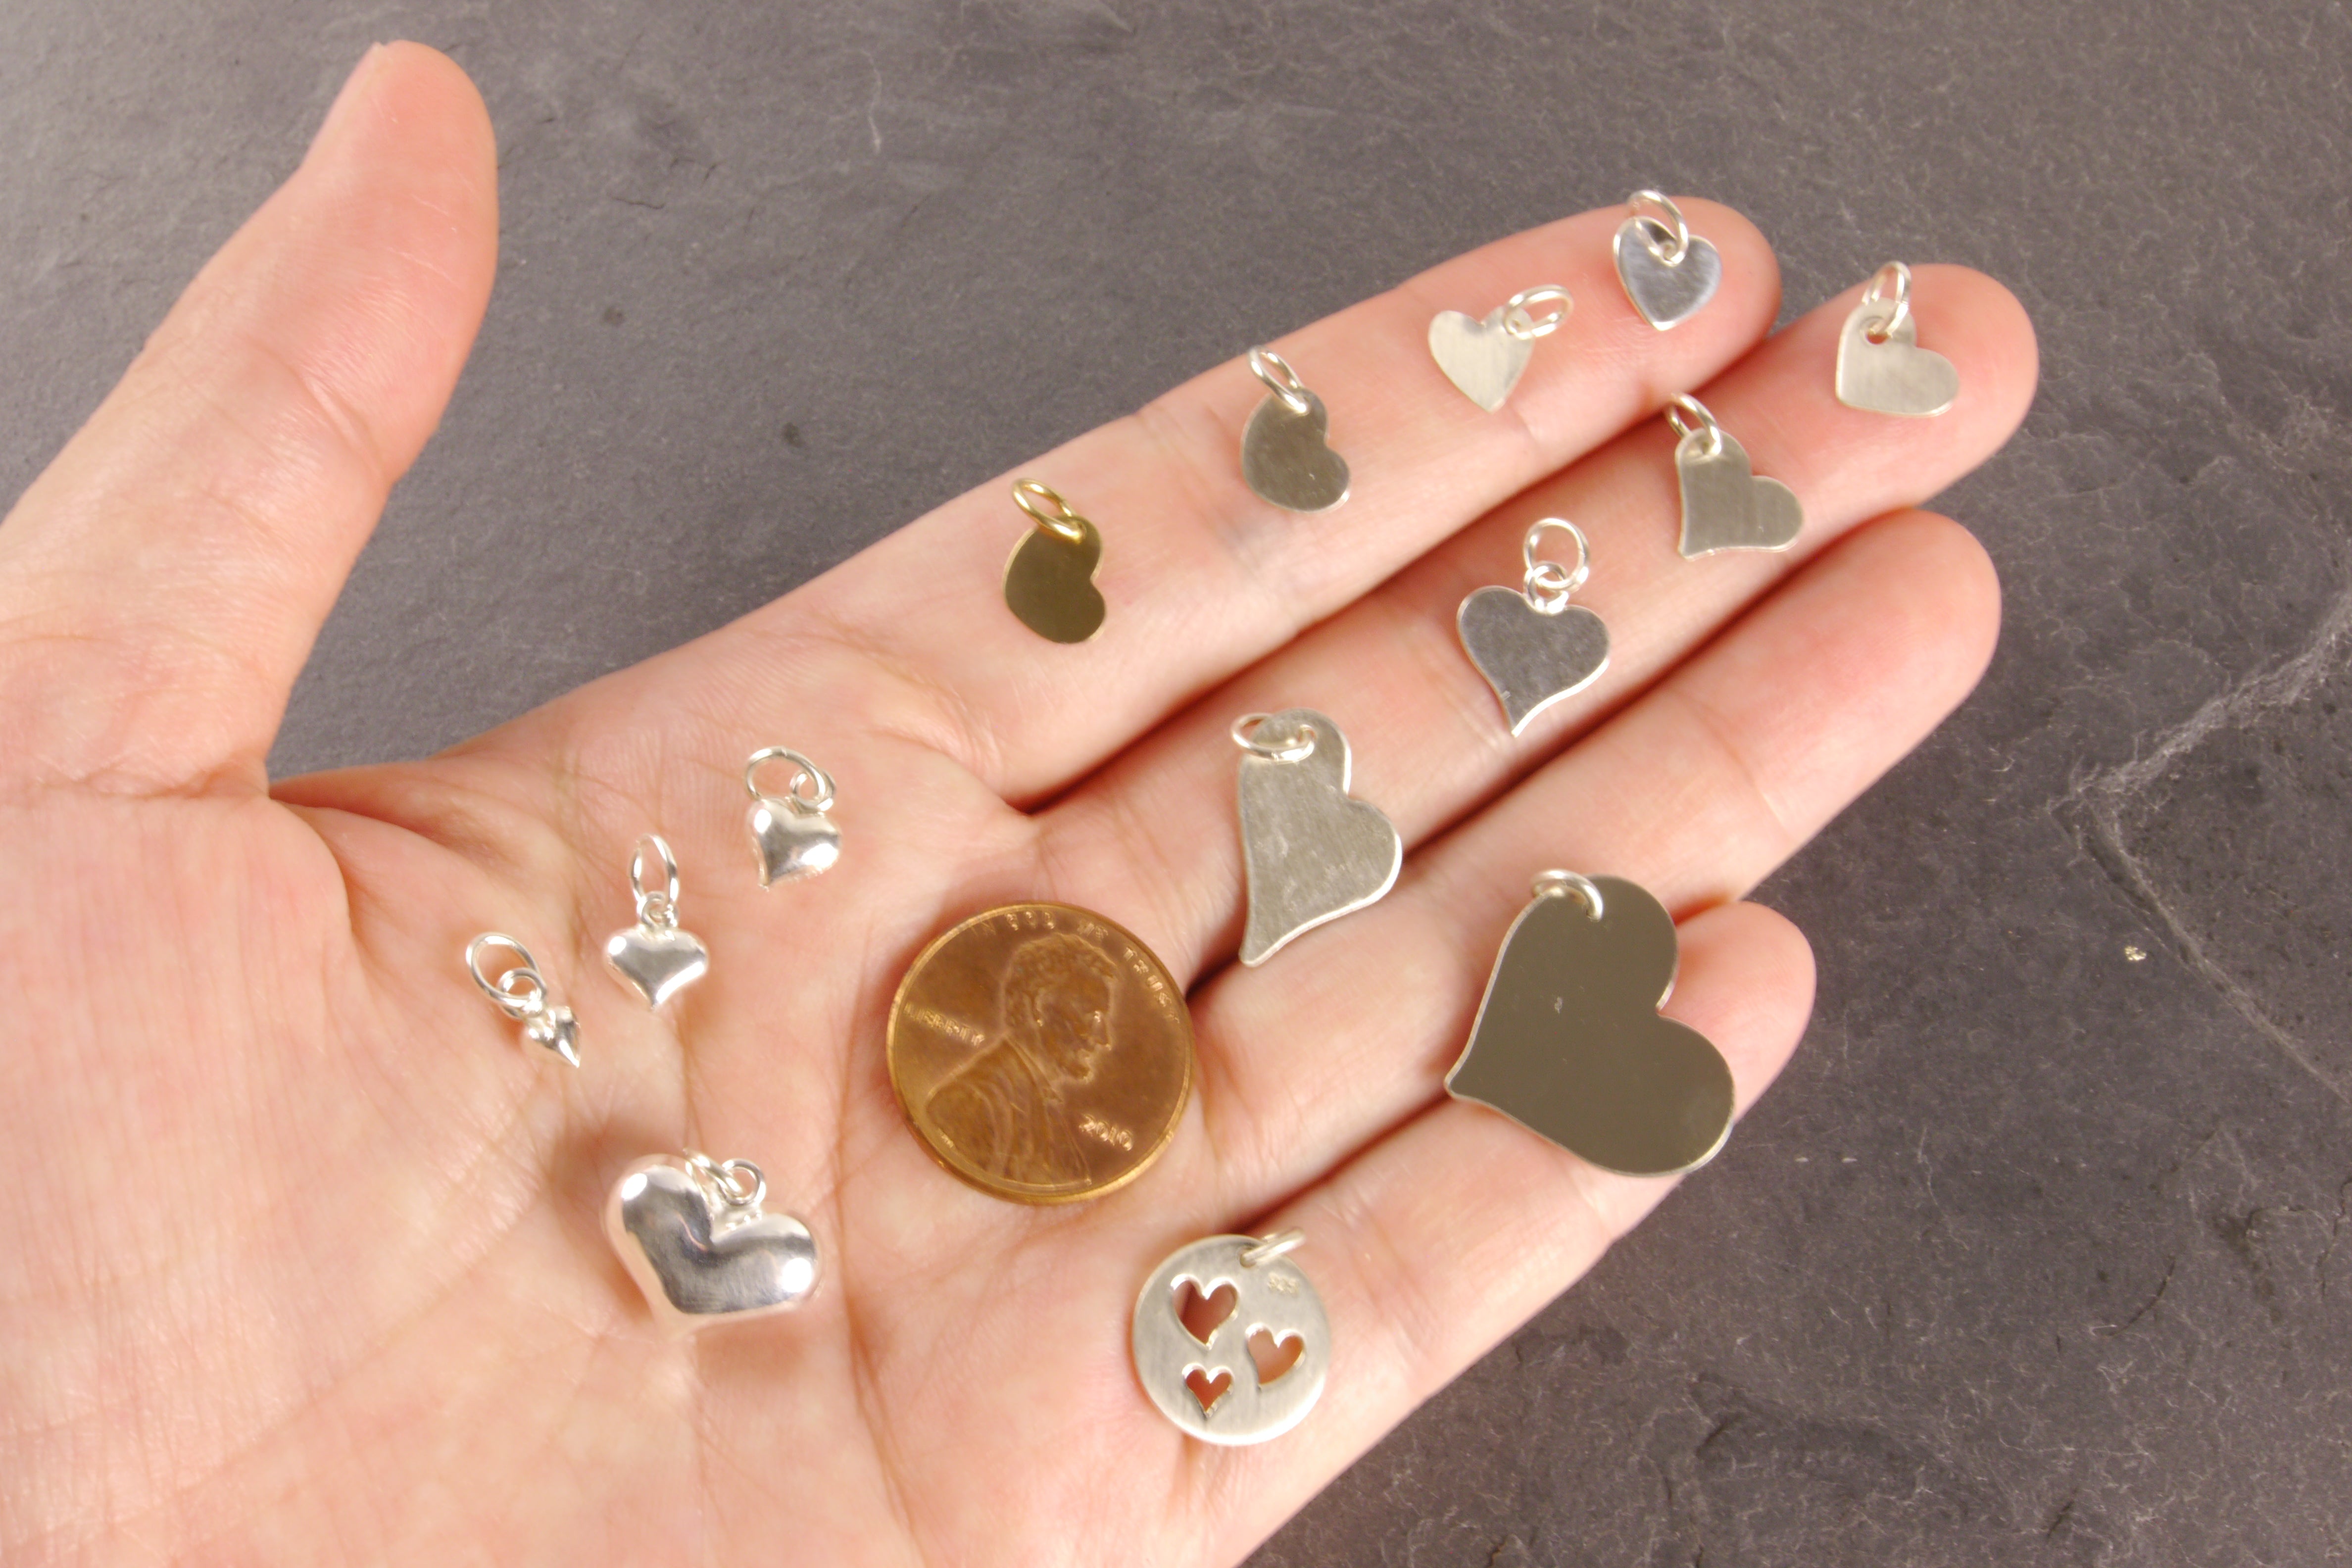 tiny charms on hand for size reference